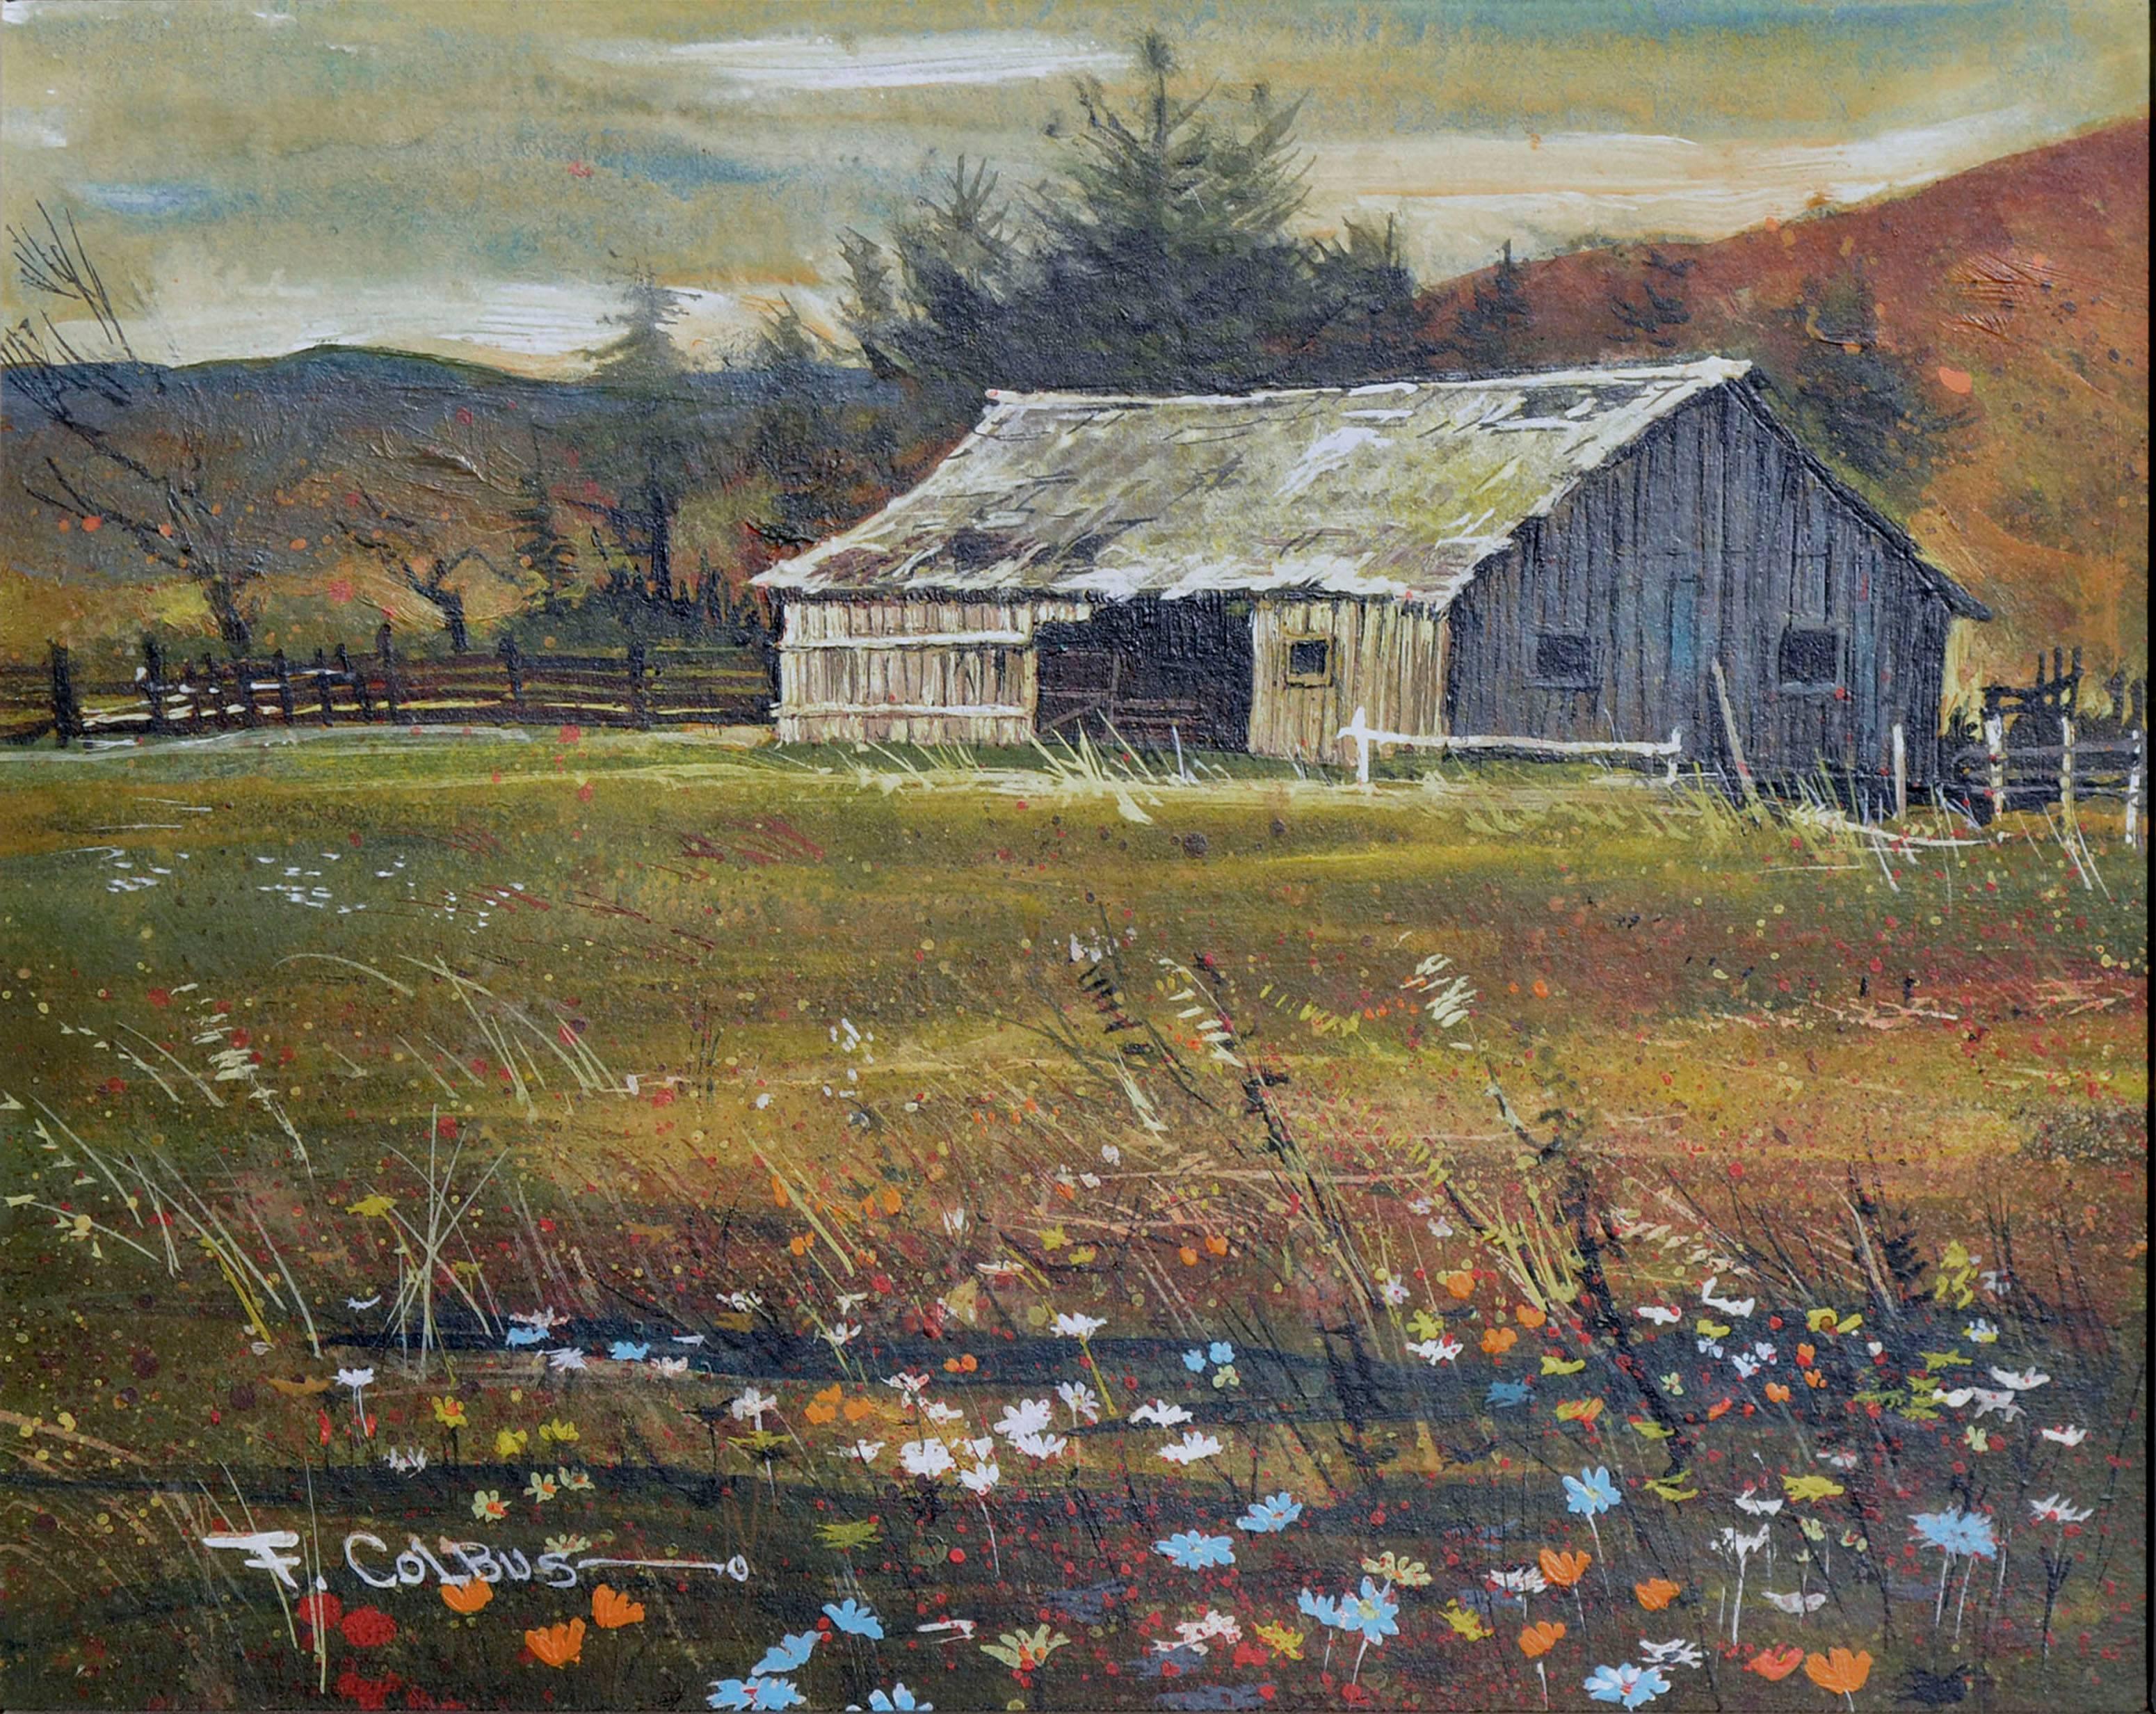 Countryside Barn with Wildflowers Landscape  - Painting by Frederick Colbus